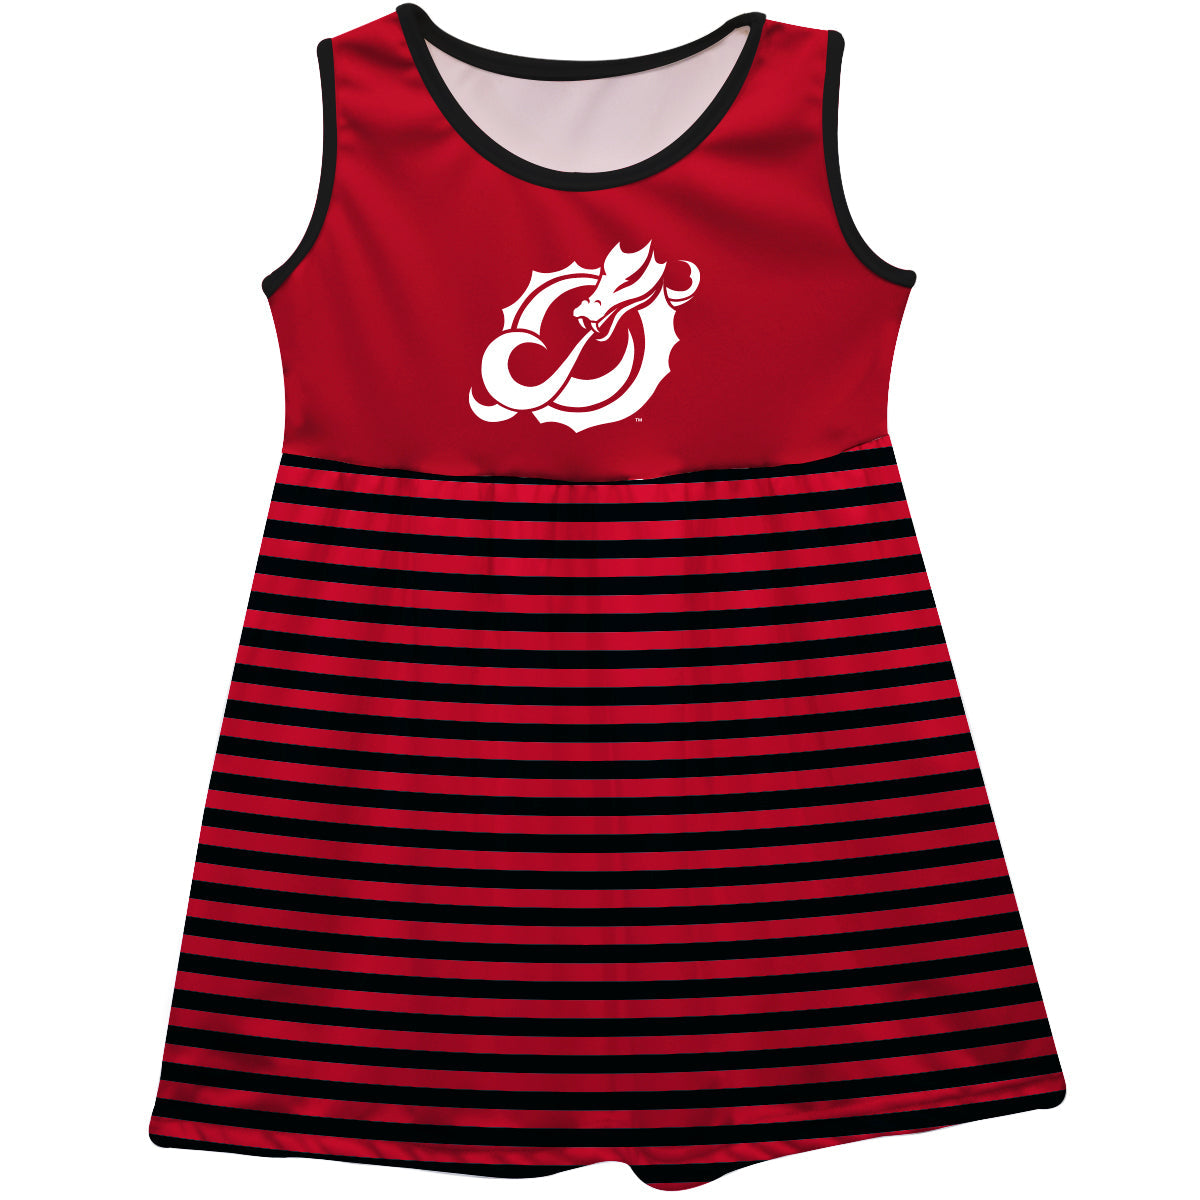 Minnesota State Dragons Girls Game Day Sleeveless Tank Dress Solid Red Logo Stripes on Skirt by Vive La Fete-Campus-Wardrobe